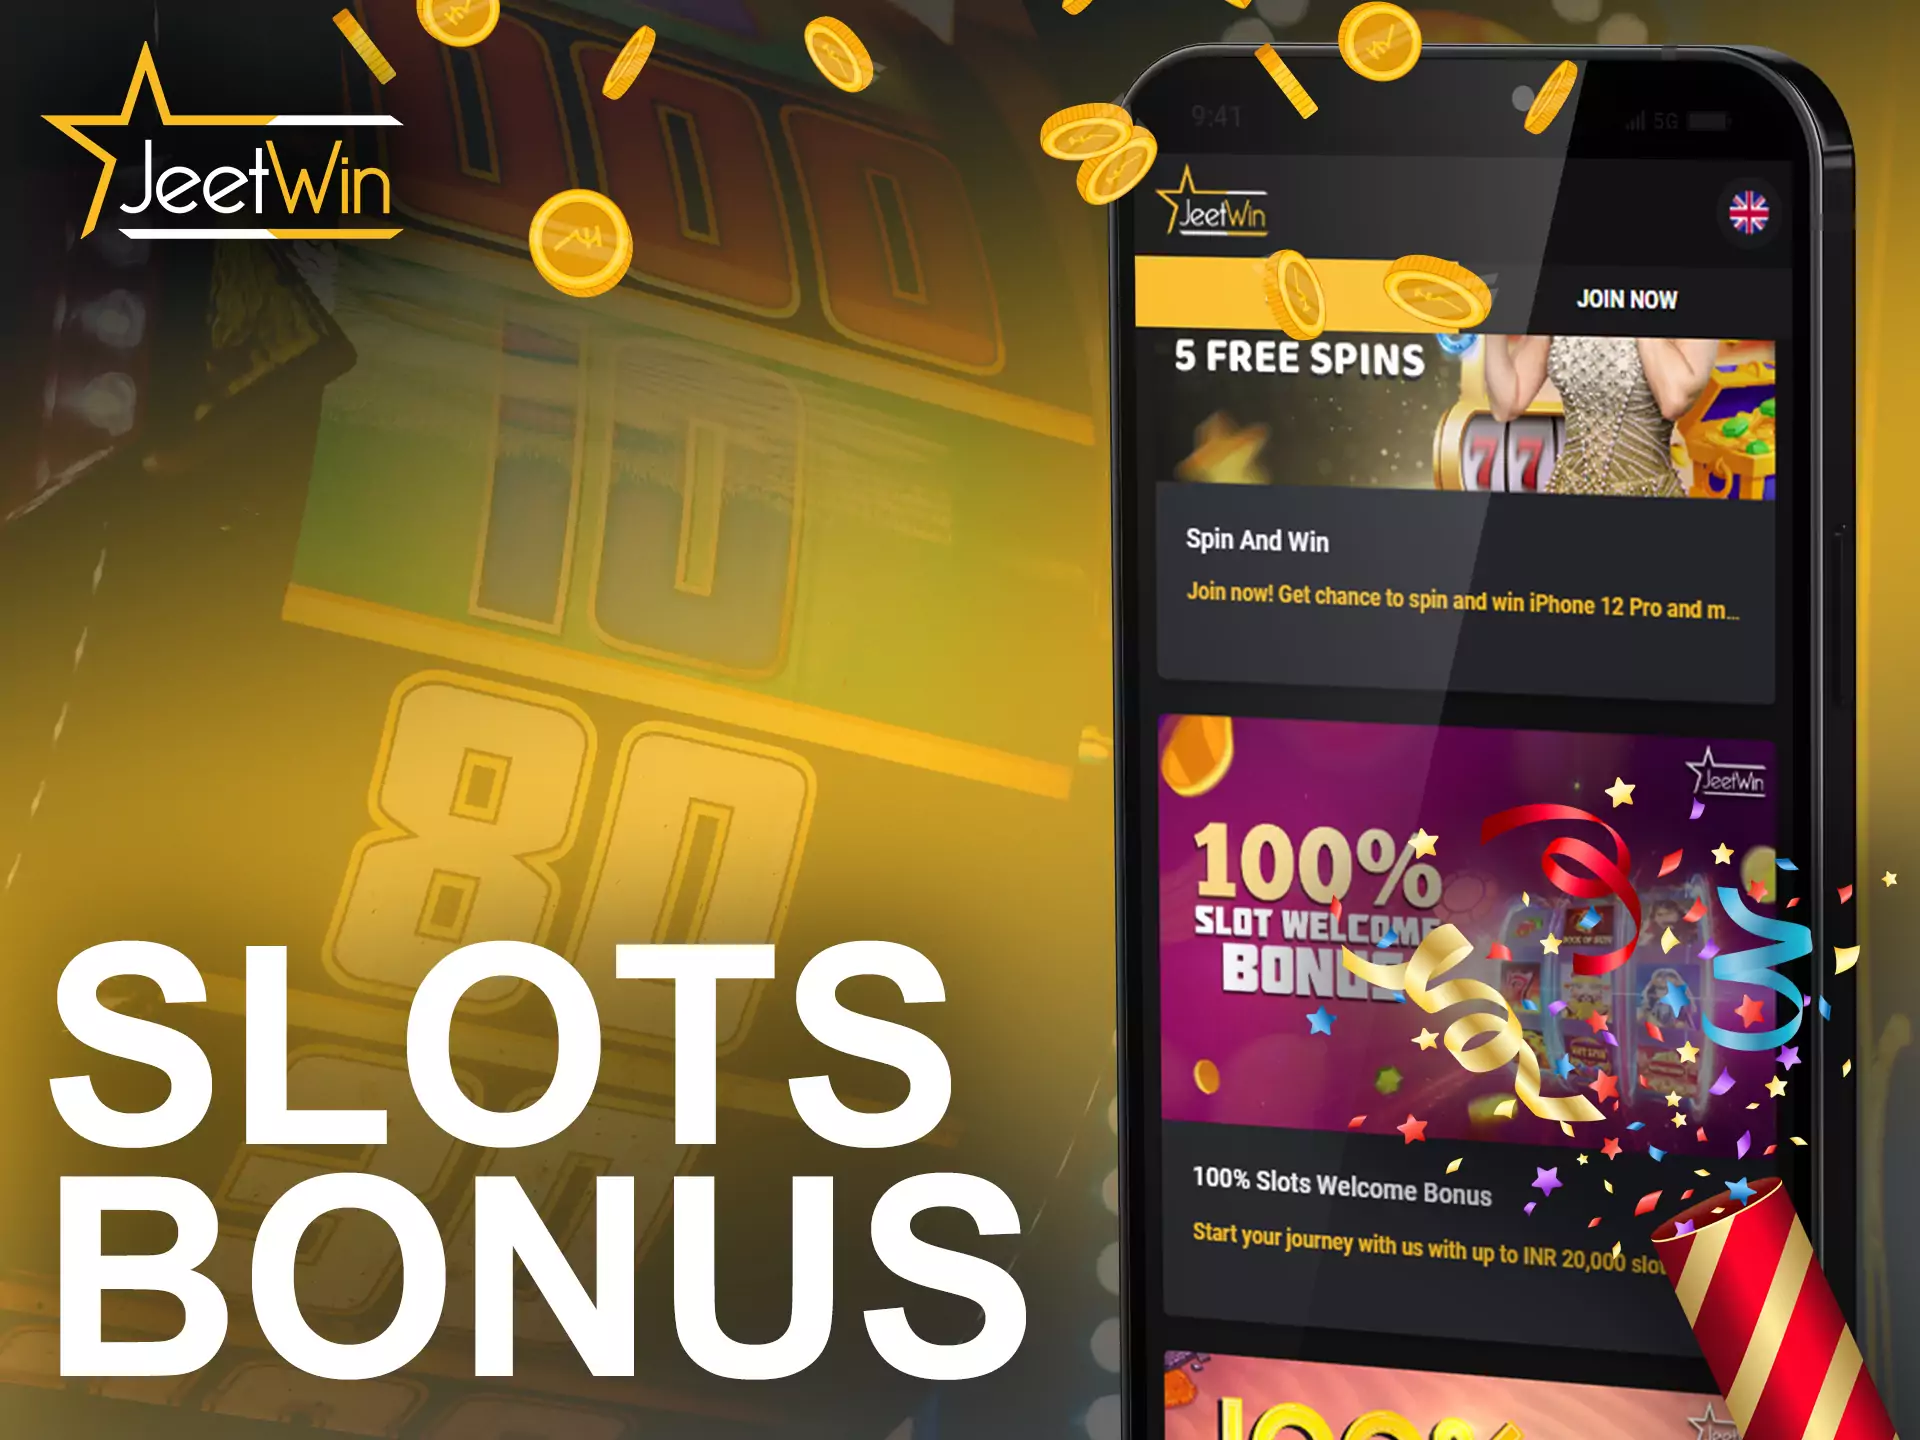 Get a special bonus for playing slots at JeetWin.